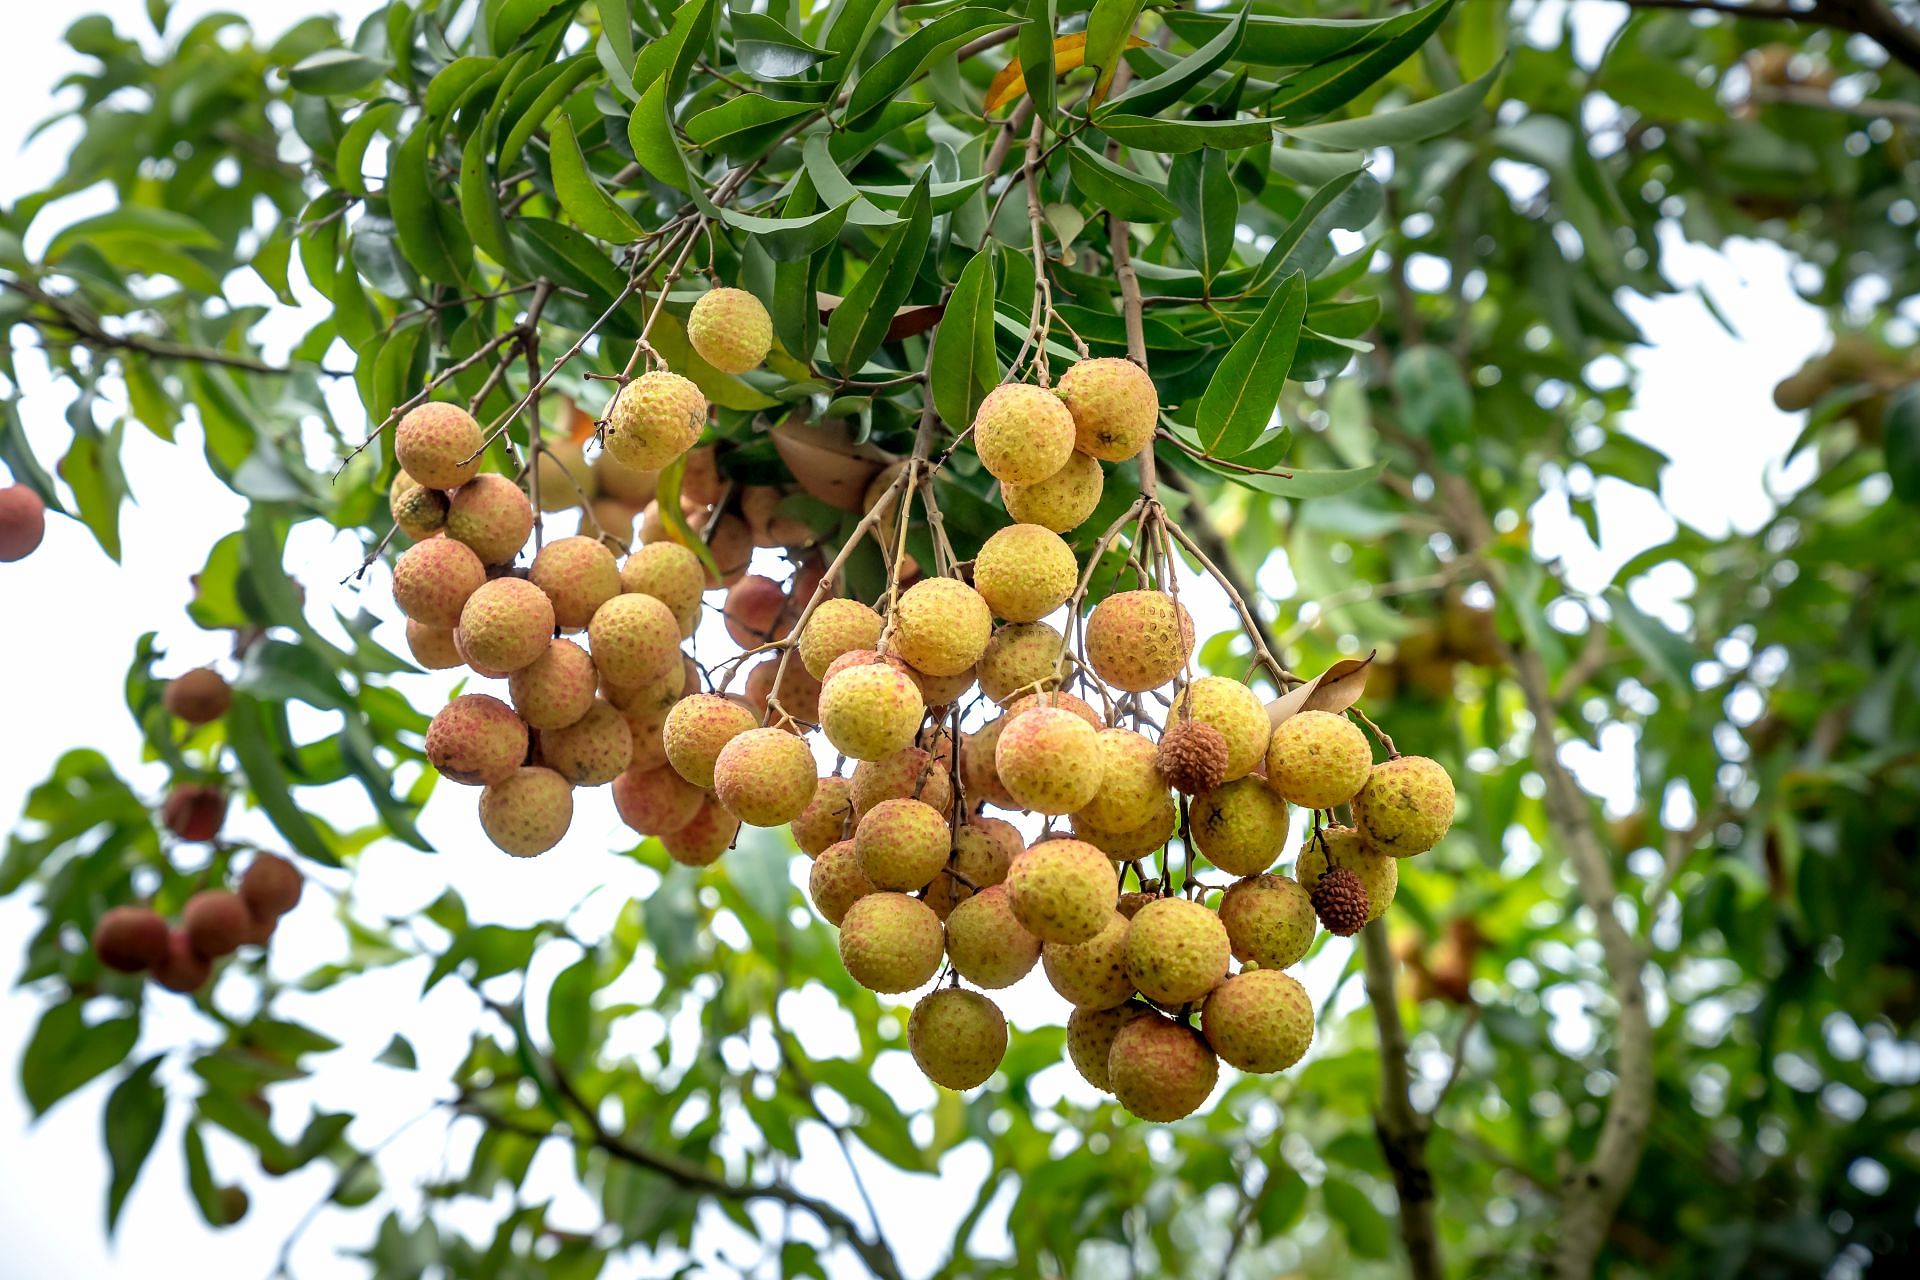 The Longan fruit is also called a dragon